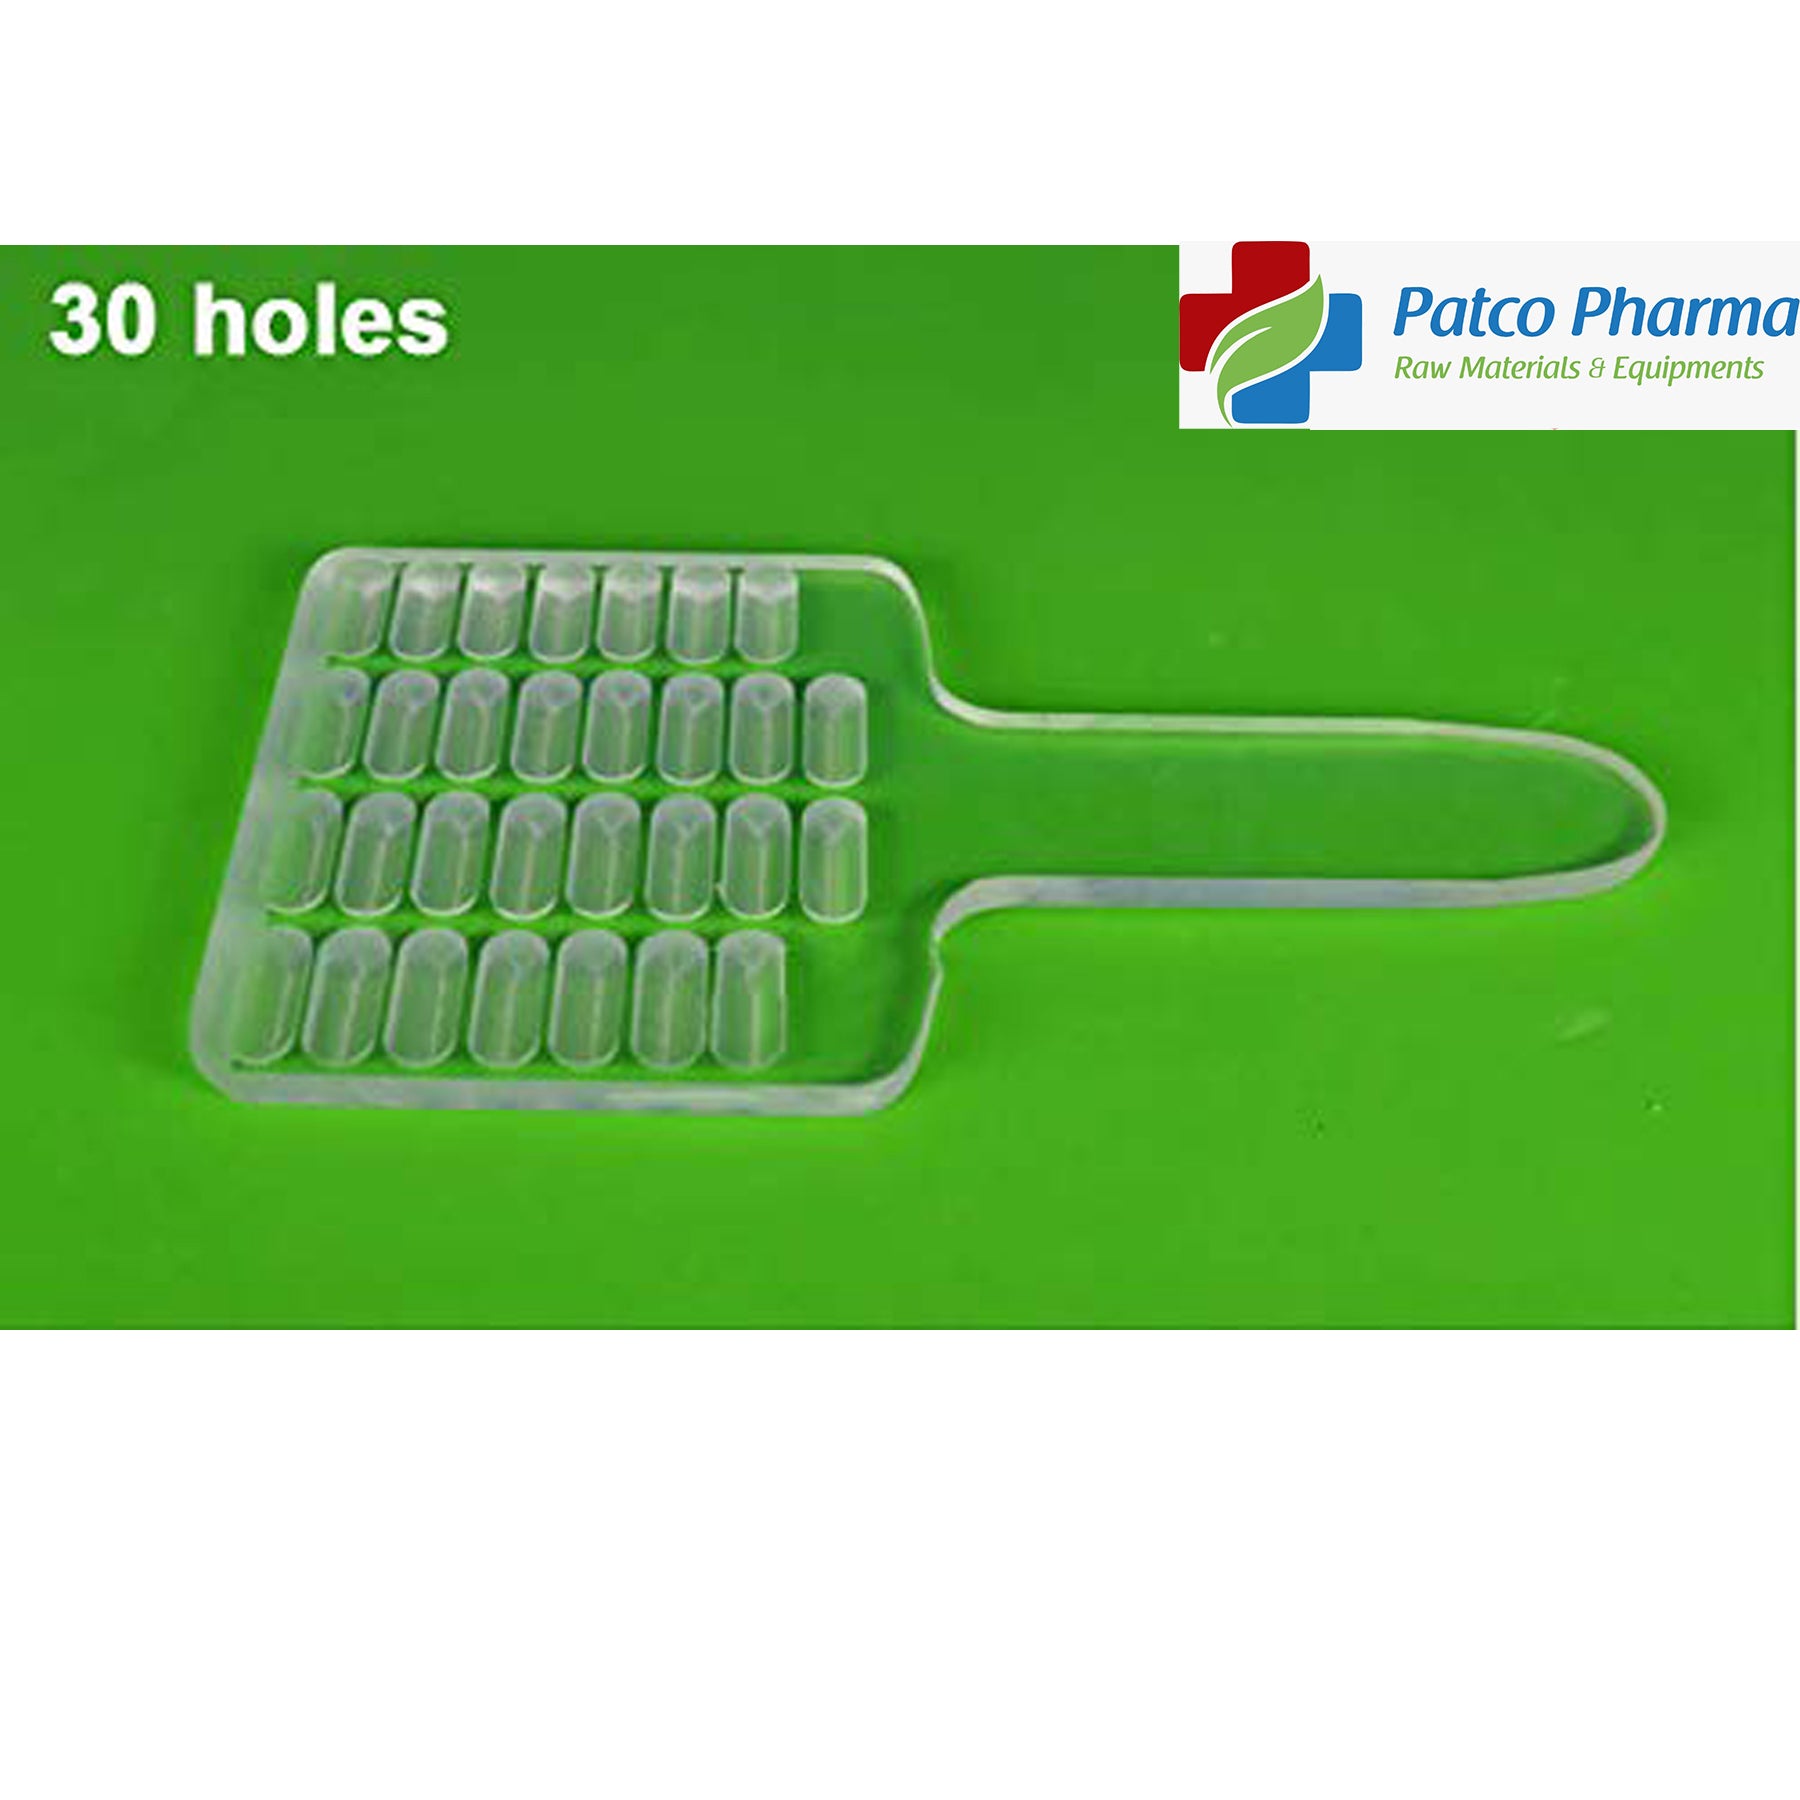 Manual Capsule Counter Count Board/Tray For Size 00 Capsule (30 Holes Capsule Counter), Patco Pharma, Capsule Filling Machines & Tools, manual-capsule-counter-count-board-tray-for-size-00-capsule-30-holes-capsule-counter, 60 holes capsule counter, capsule counter, size 00 capsule, Patco Pharma